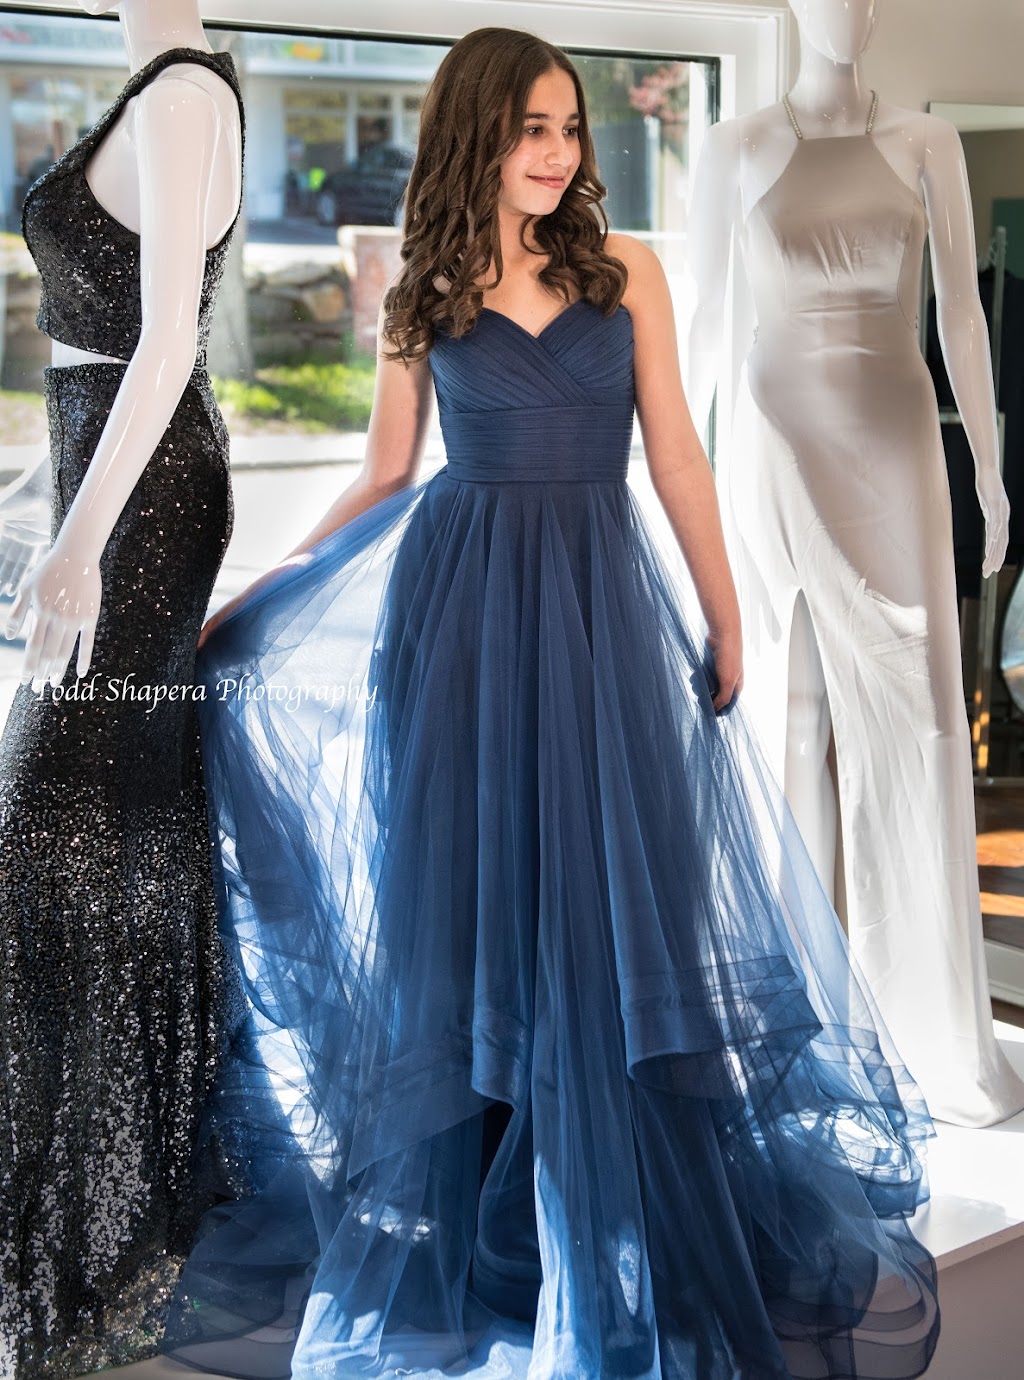 All About The Dress | 480 Main St, Armonk, NY 10504 | Phone: (914) 219-5300